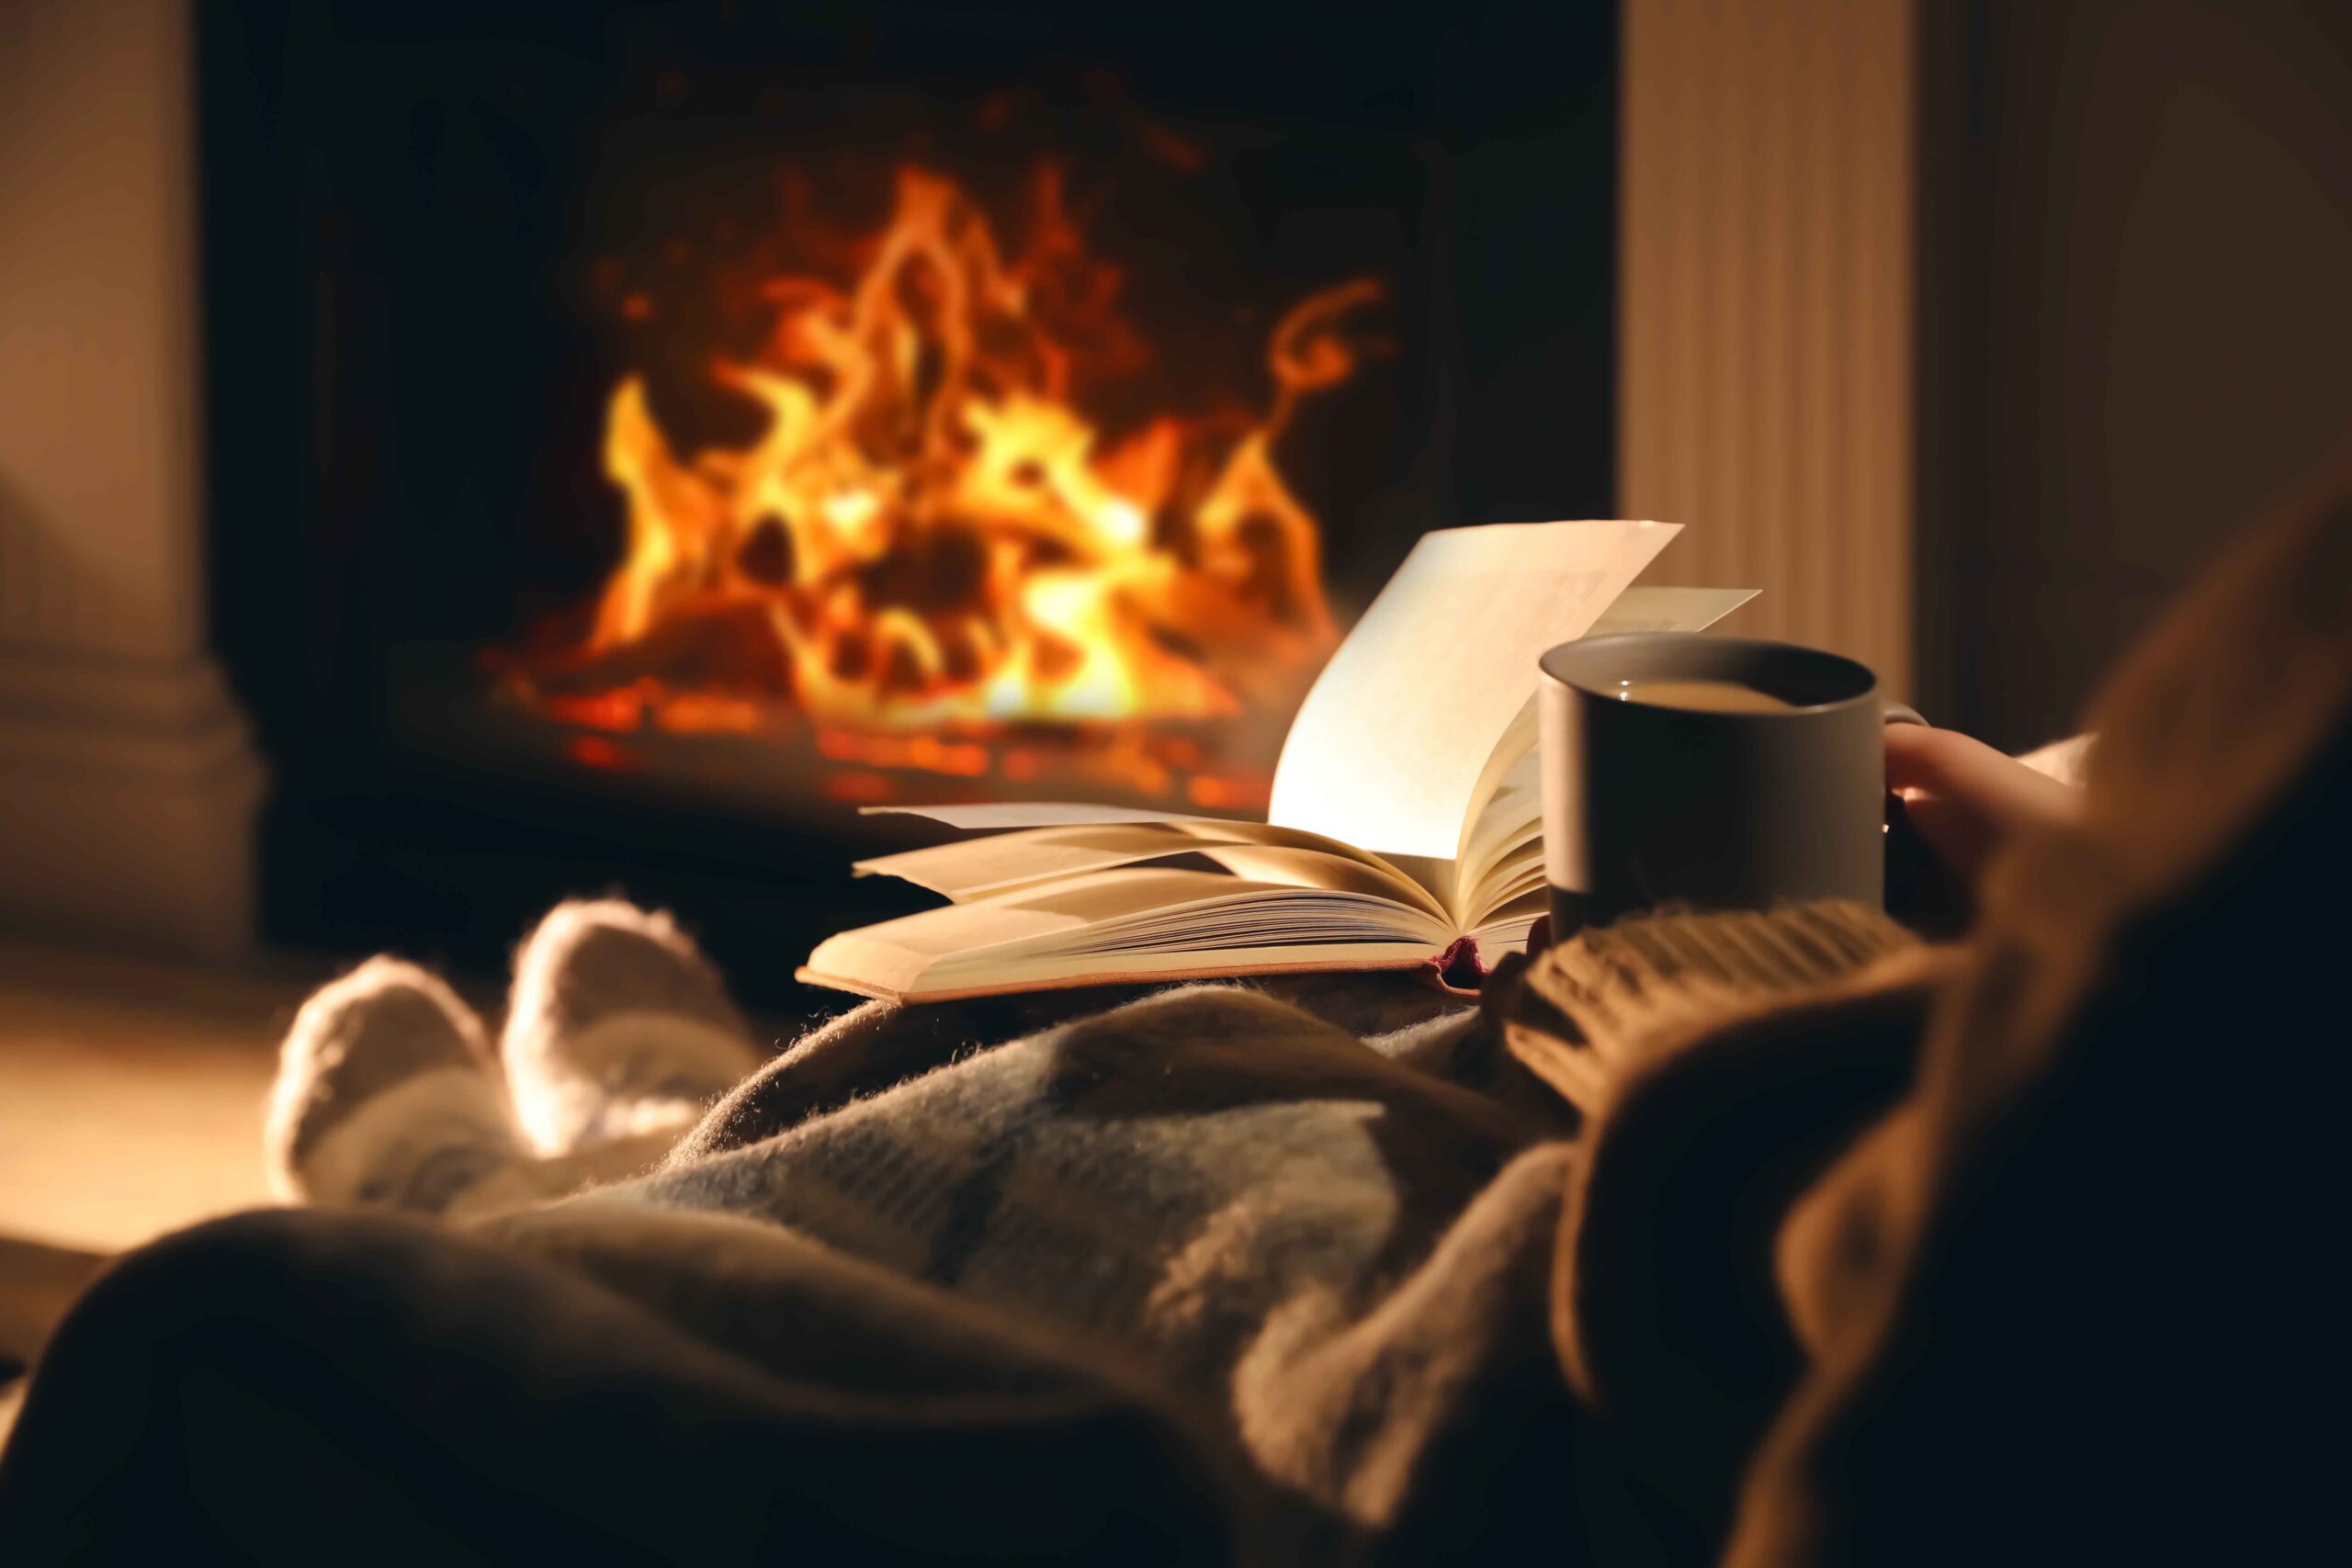 A person in a sweater sitting in front of a fireplace with a book and cup of coffee.